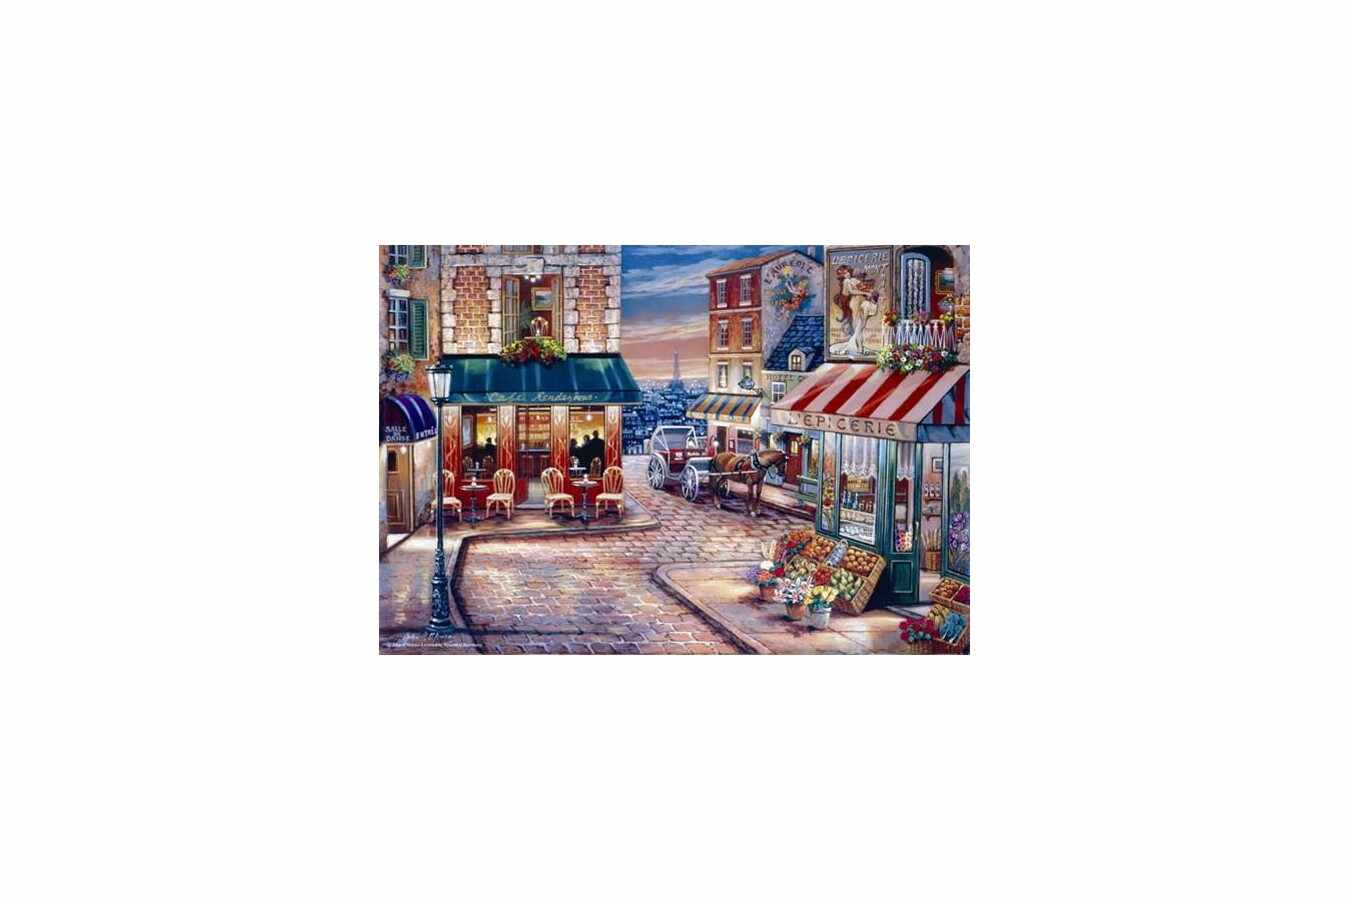 Puzzle Anatolian - Cafe Rendezvous, 500 piese (3523)